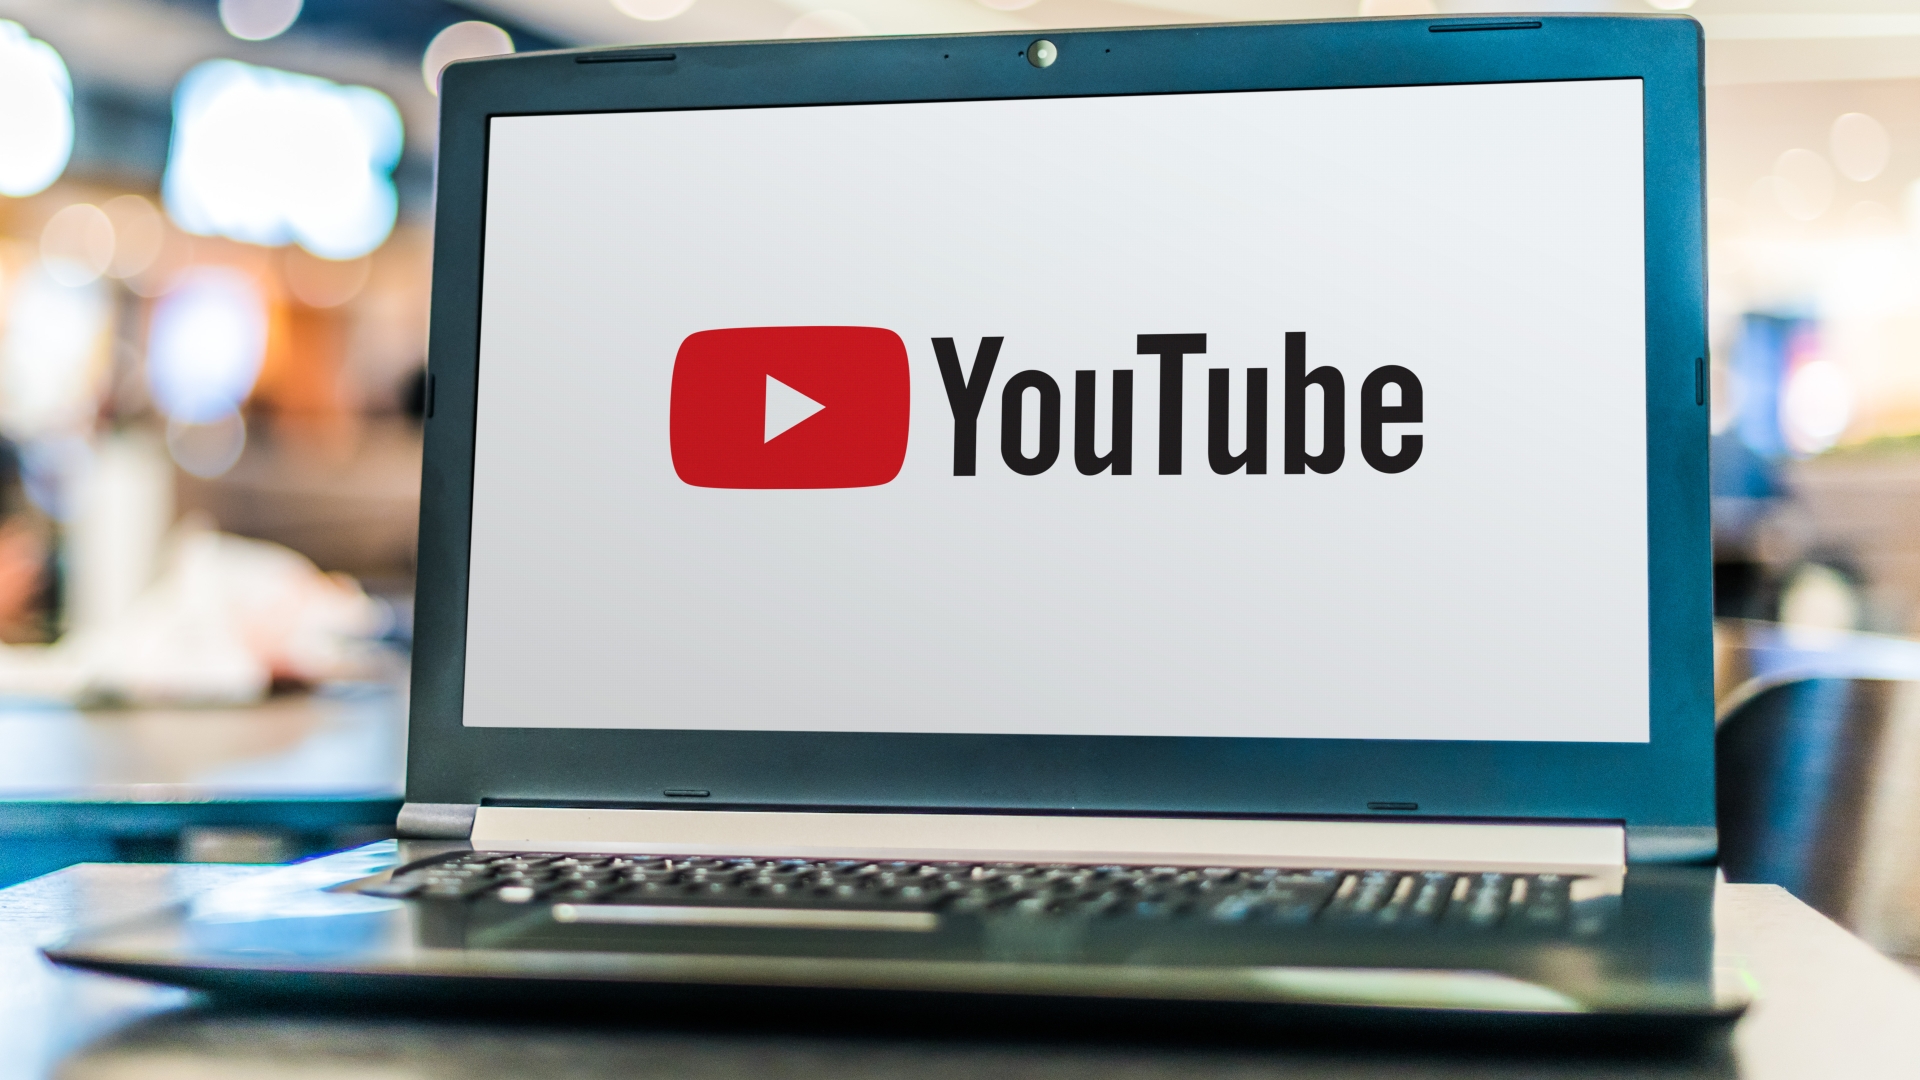 How To Download Youtube Videos On Chromebook In High Quality Windows 10 for Free